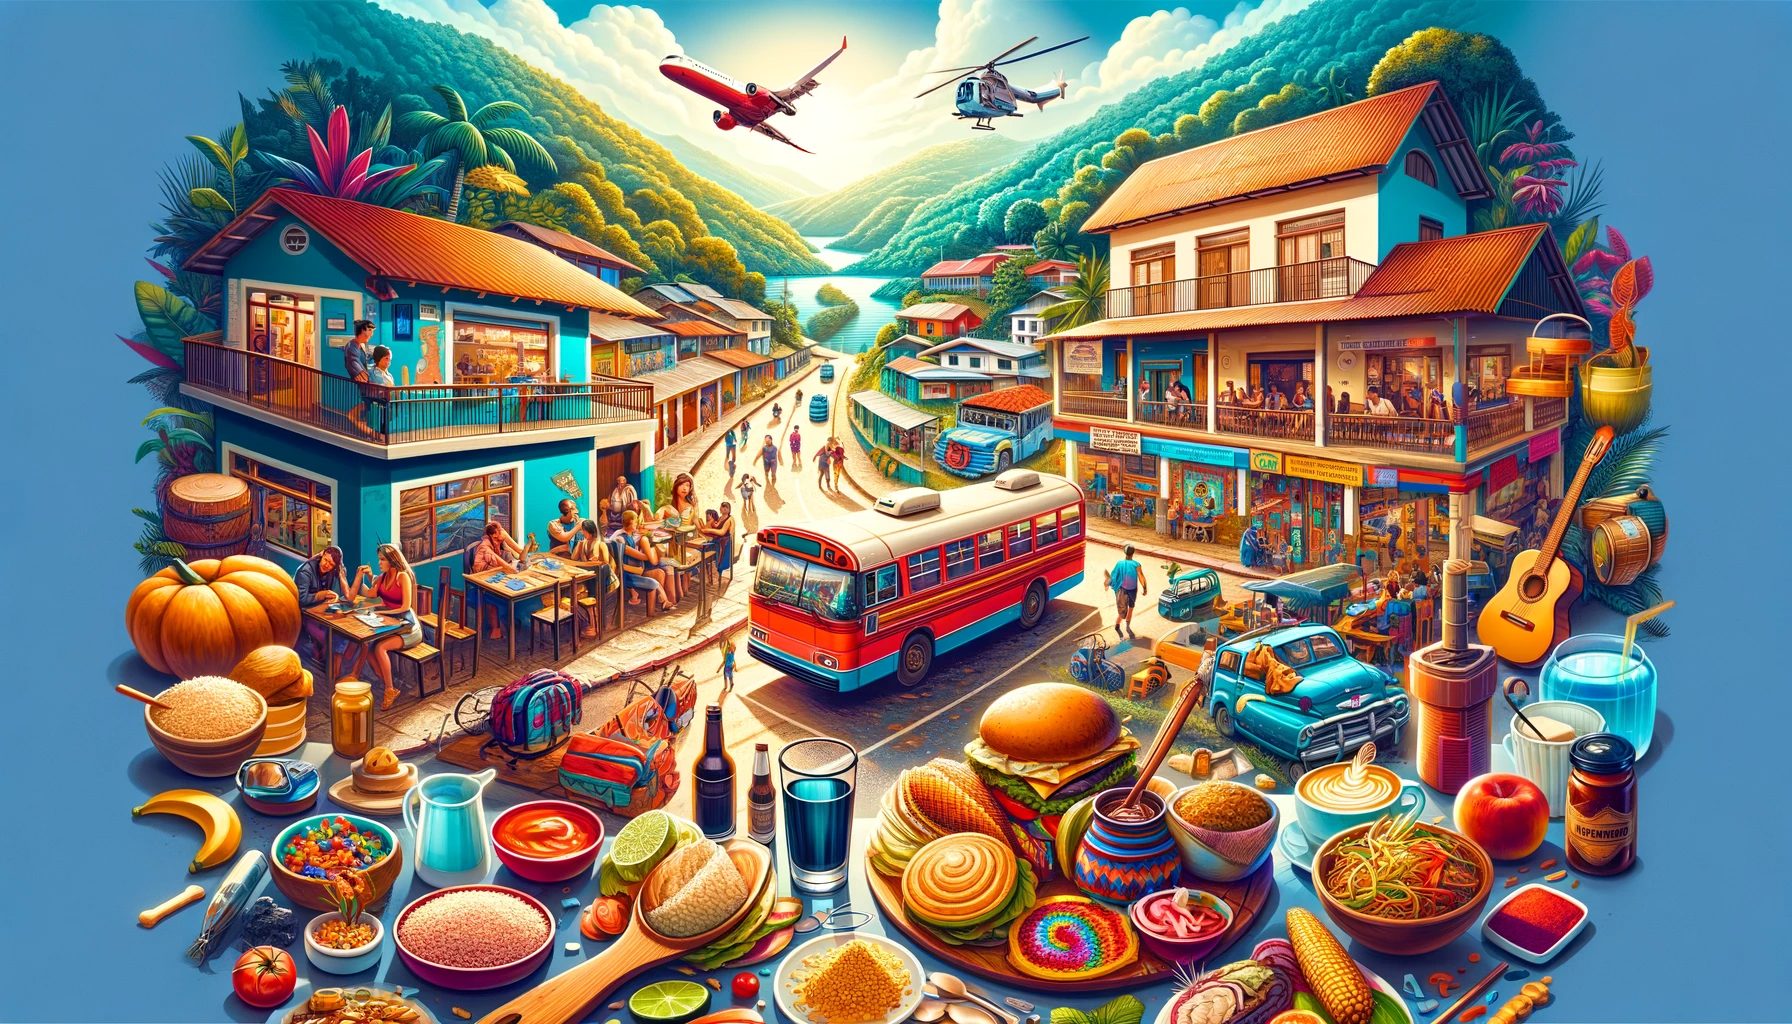 Colorful tropical village scene with food and transportation.